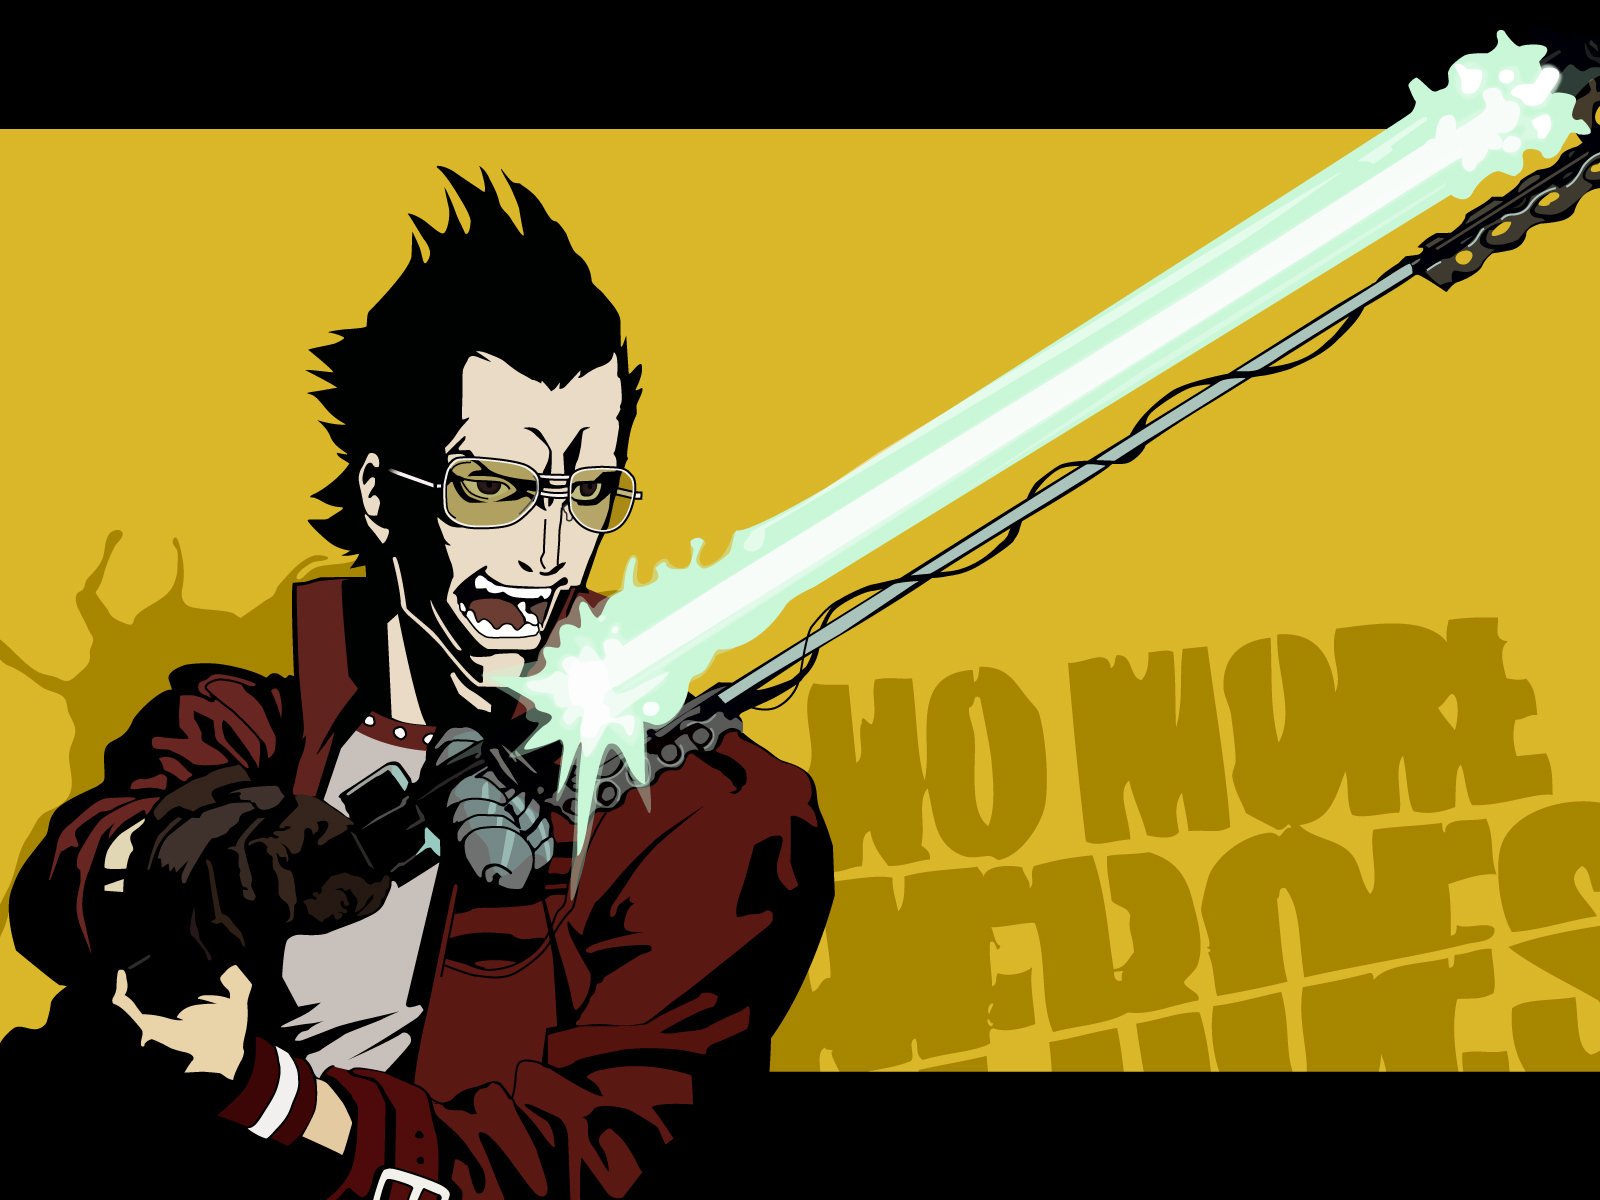 No More Heroes Wallpaper And Background Image - No More Heroes , HD Wallpaper & Backgrounds